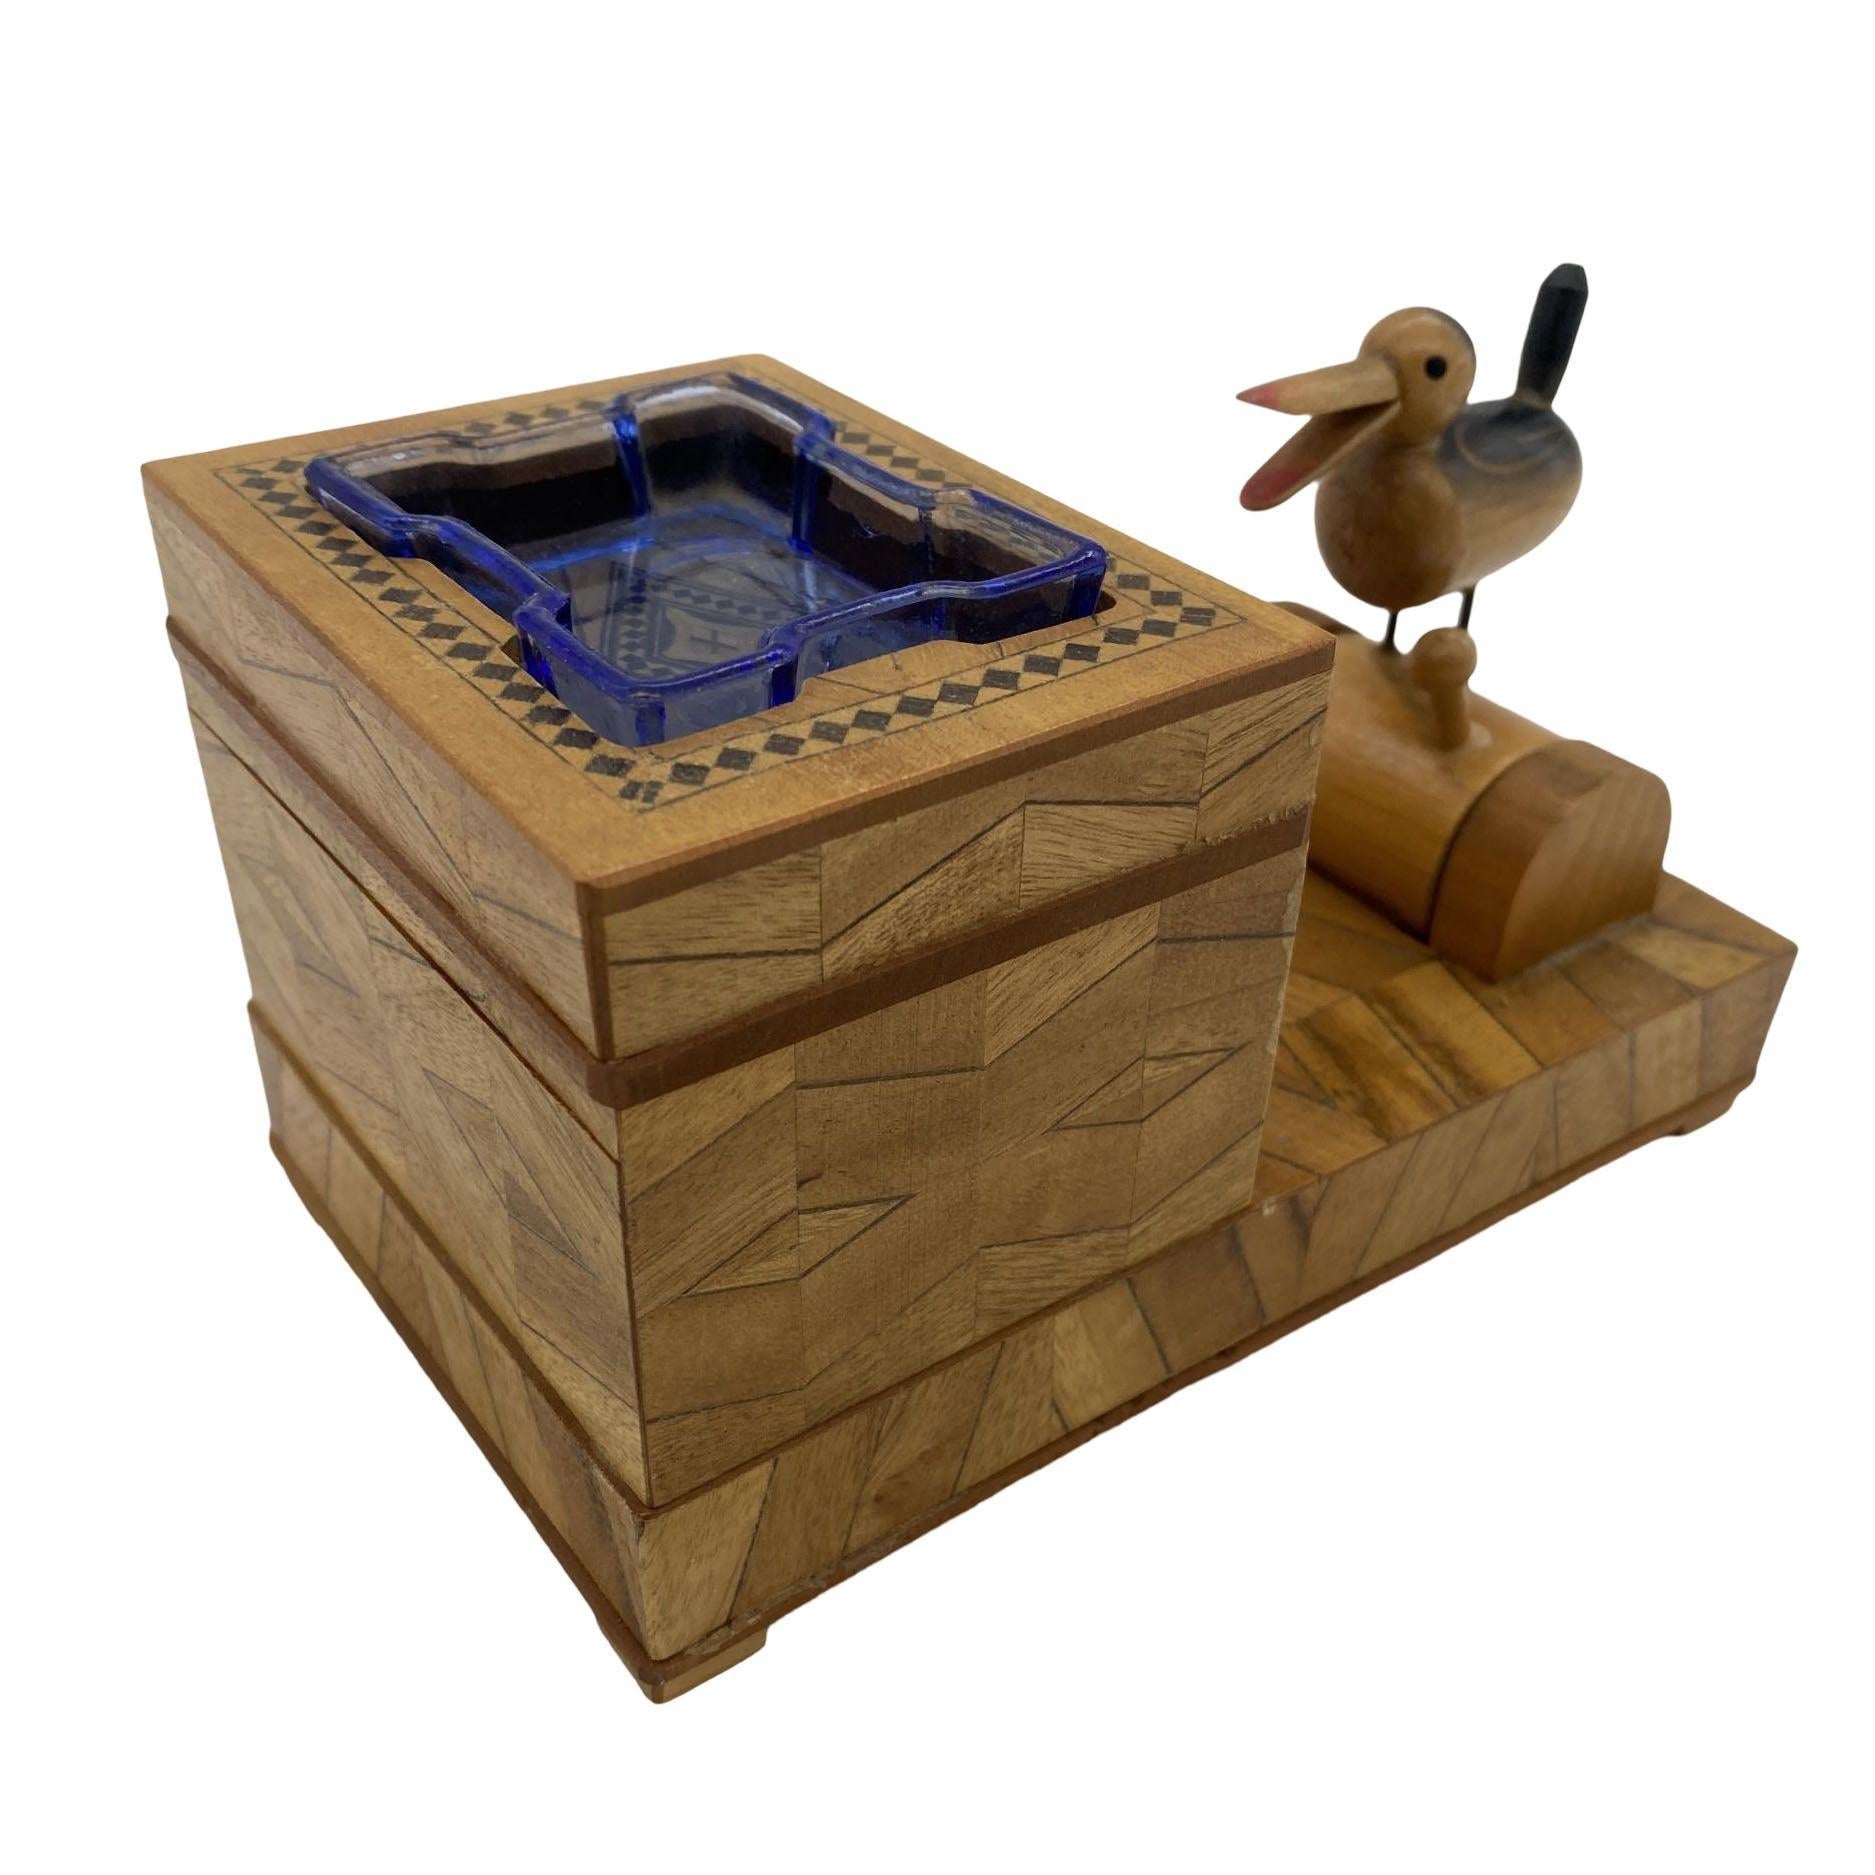 Vintage wooden cigarette box, cigarette holder, and ashtray with mechanical bird. simply push down the lever and a cigarette will be dispensed as a bird picks up the cigarette out of the box. 

The carved box is decorated with geometric